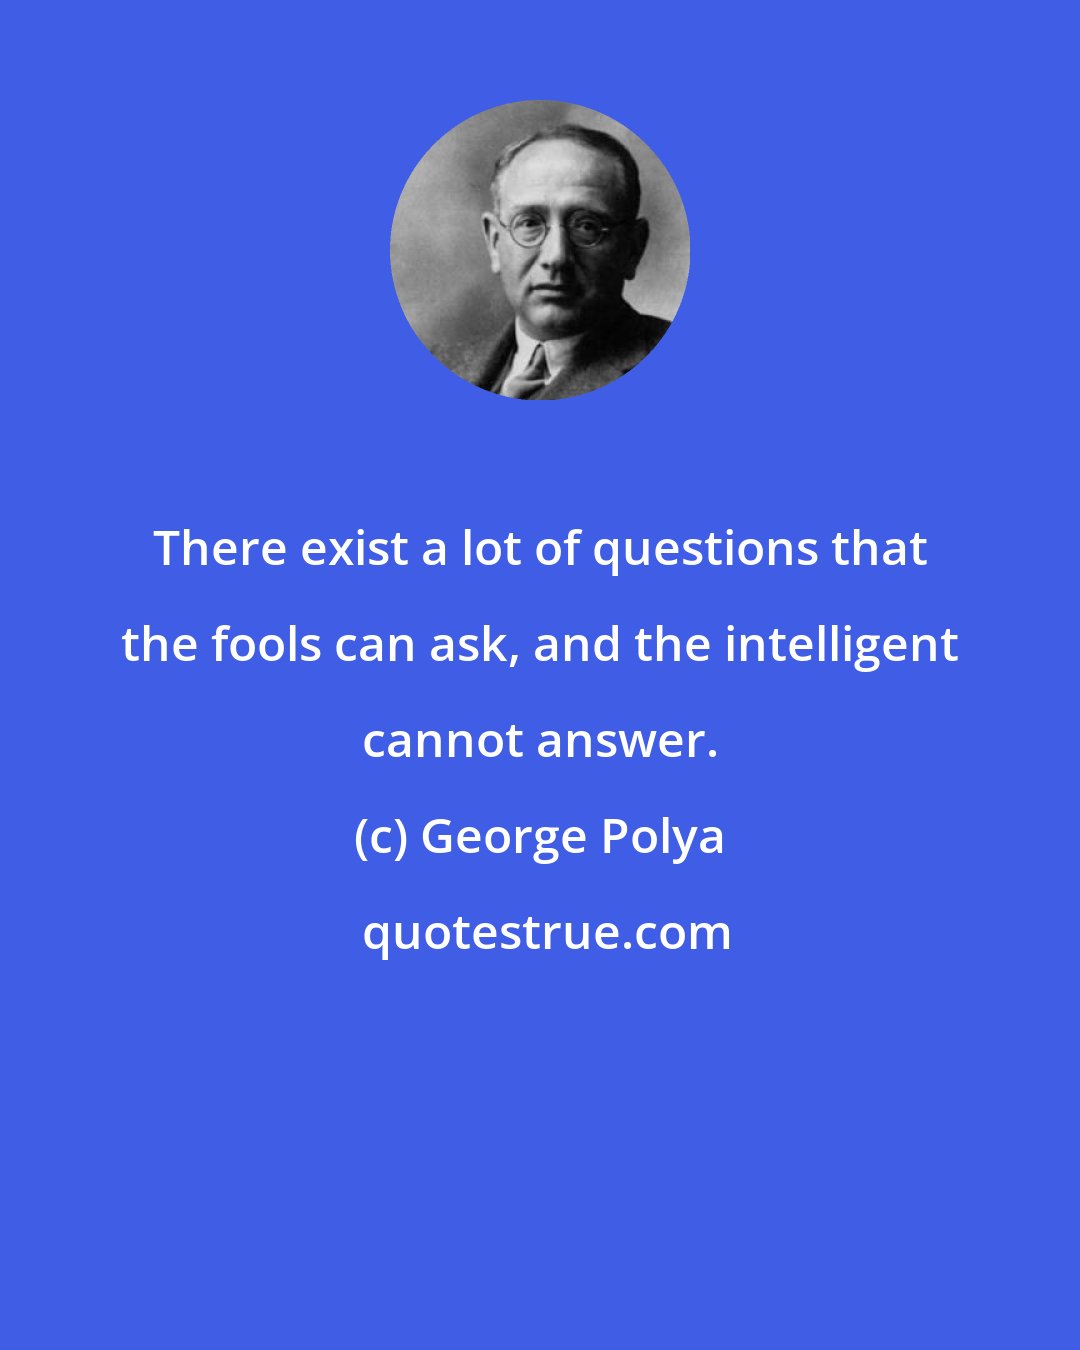 George Polya: There exist a lot of questions that the fools can ask, and the intelligent cannot answer.